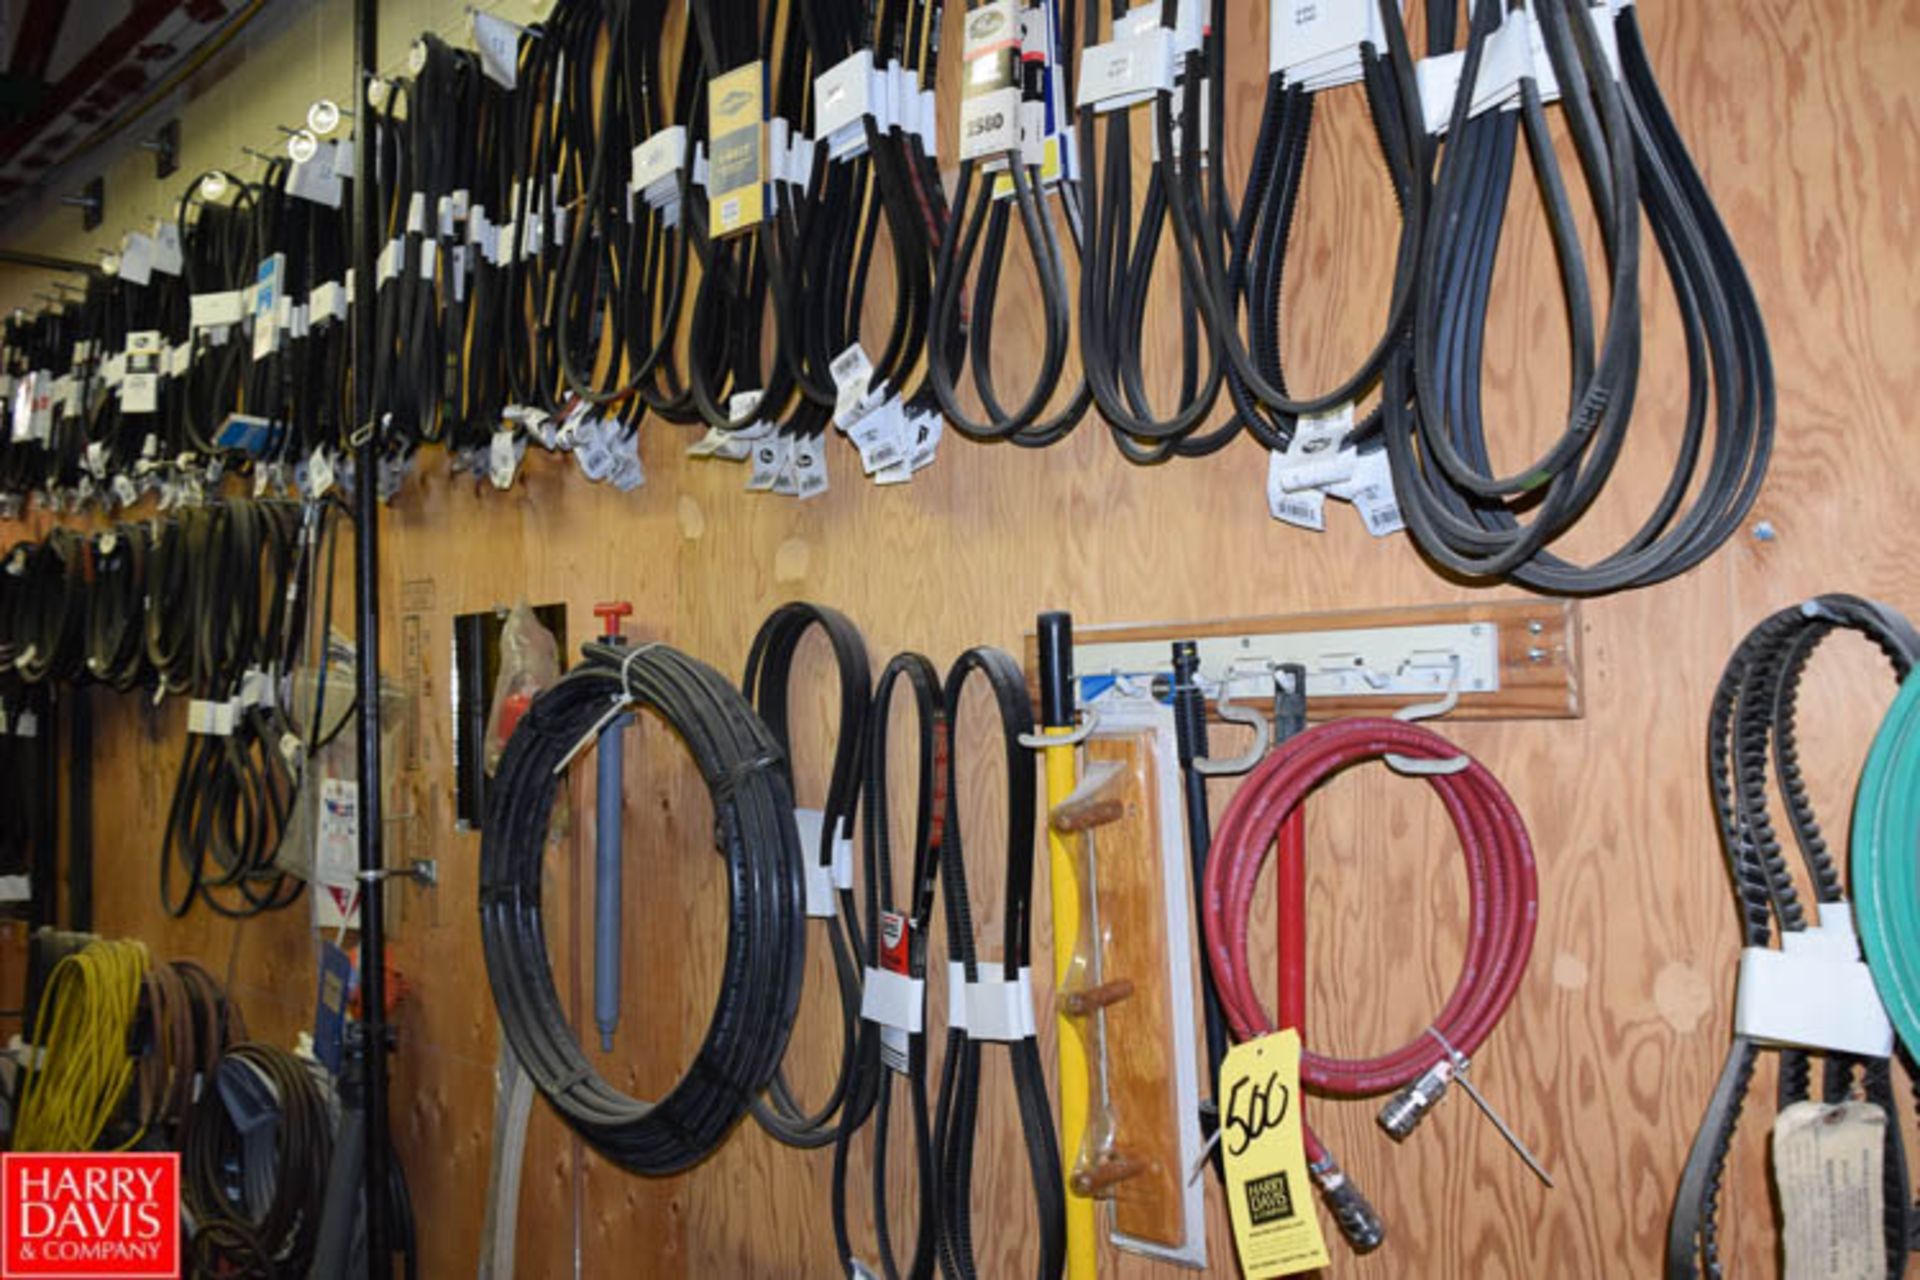 Assorted Belts, Fire Extinguishers and Hardware, ETC - Rigging Fee $ 850